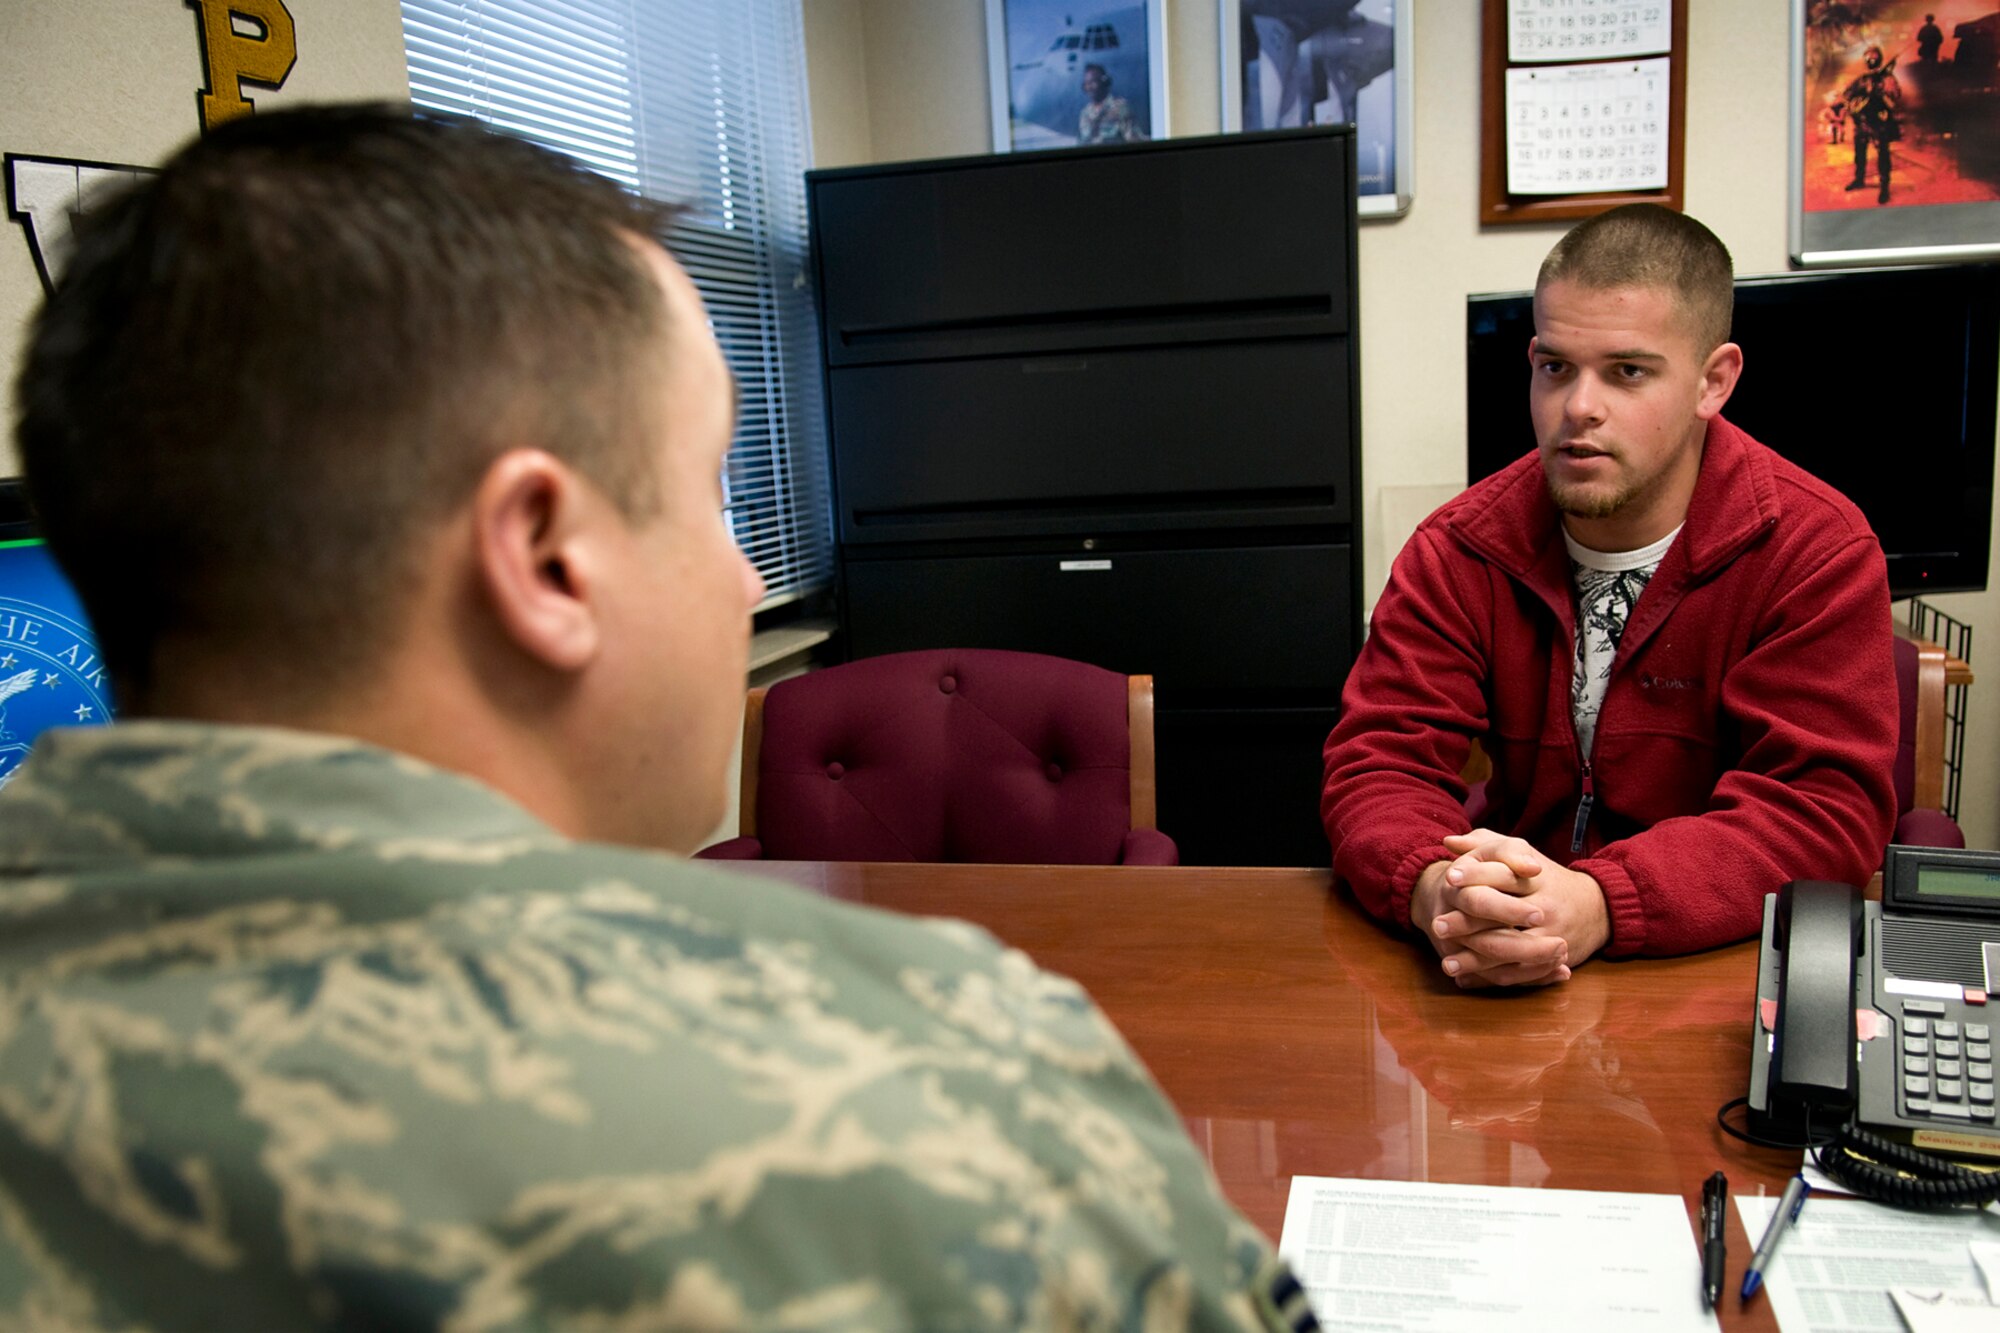 U.S. Army National Guard Pvt. 1st Class Mitchell Wooten talks with U.S. Air Force Tech. Sgt. Craig Ridener, 434th Air Refueling Wing recruiter, as he inquires about opportunities in the Air Force Reserve at Grissom Air Reserve Base, Ind., Jan. 15, 2014. The Air Force Reserve Command is now actively seeking Airmen who want to serve as full-time recruiters on active-guard and reserve tours. (U.S. Air Force photo/Tech. Sgt. Mark R. W. Orders-Woempner) 